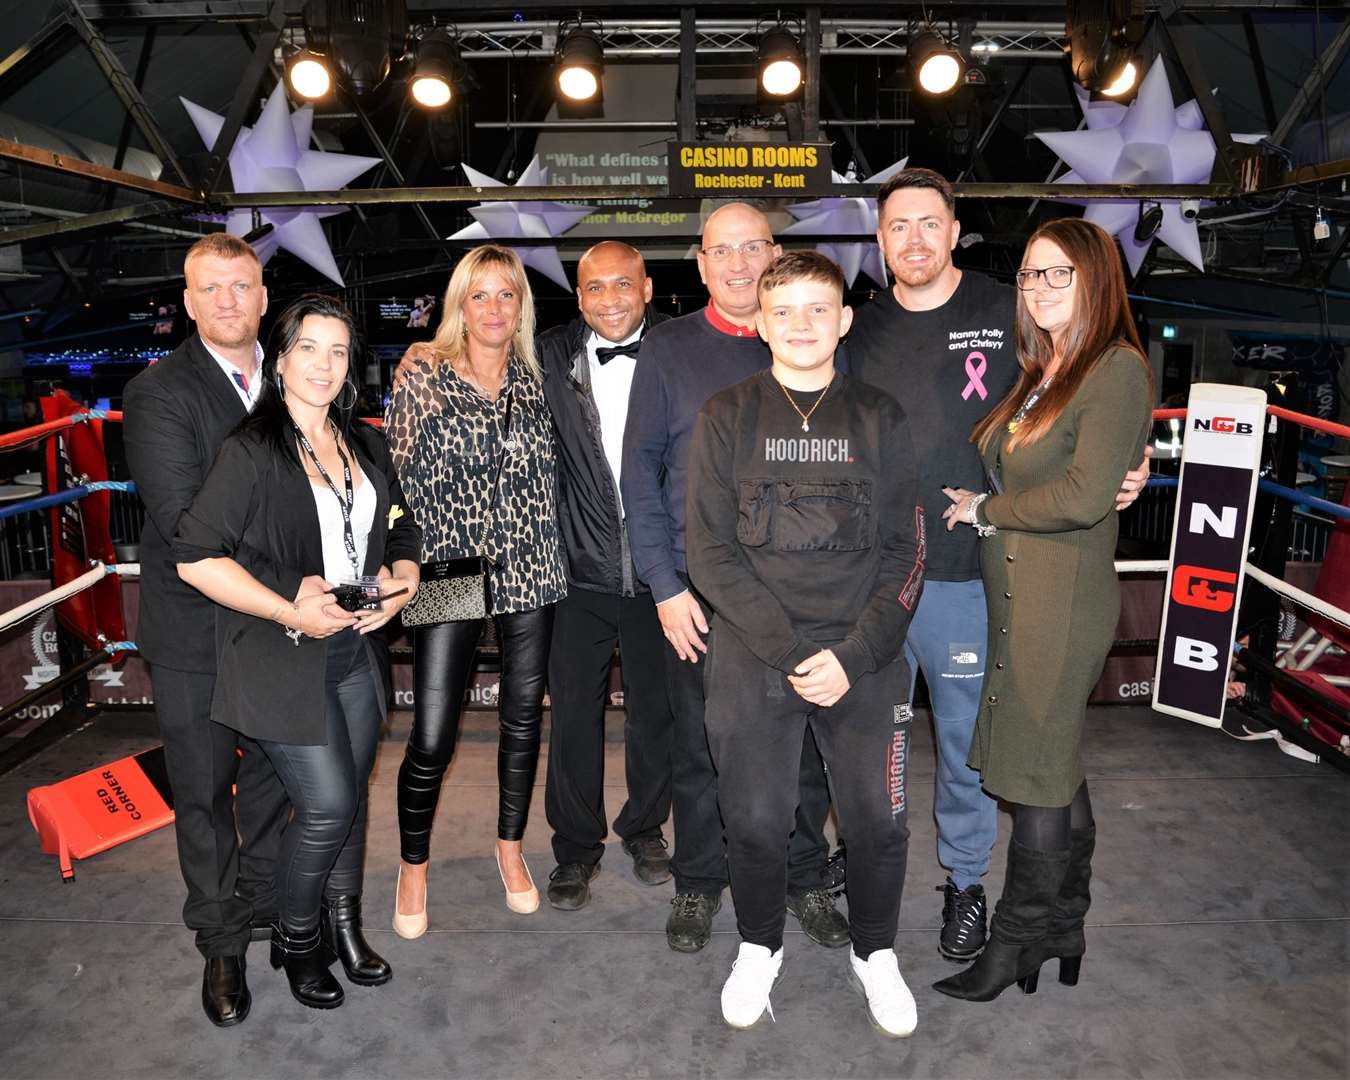 The Powell family with Celebrity official Ian John-Lewis. Picture: Box-Tec Promotions